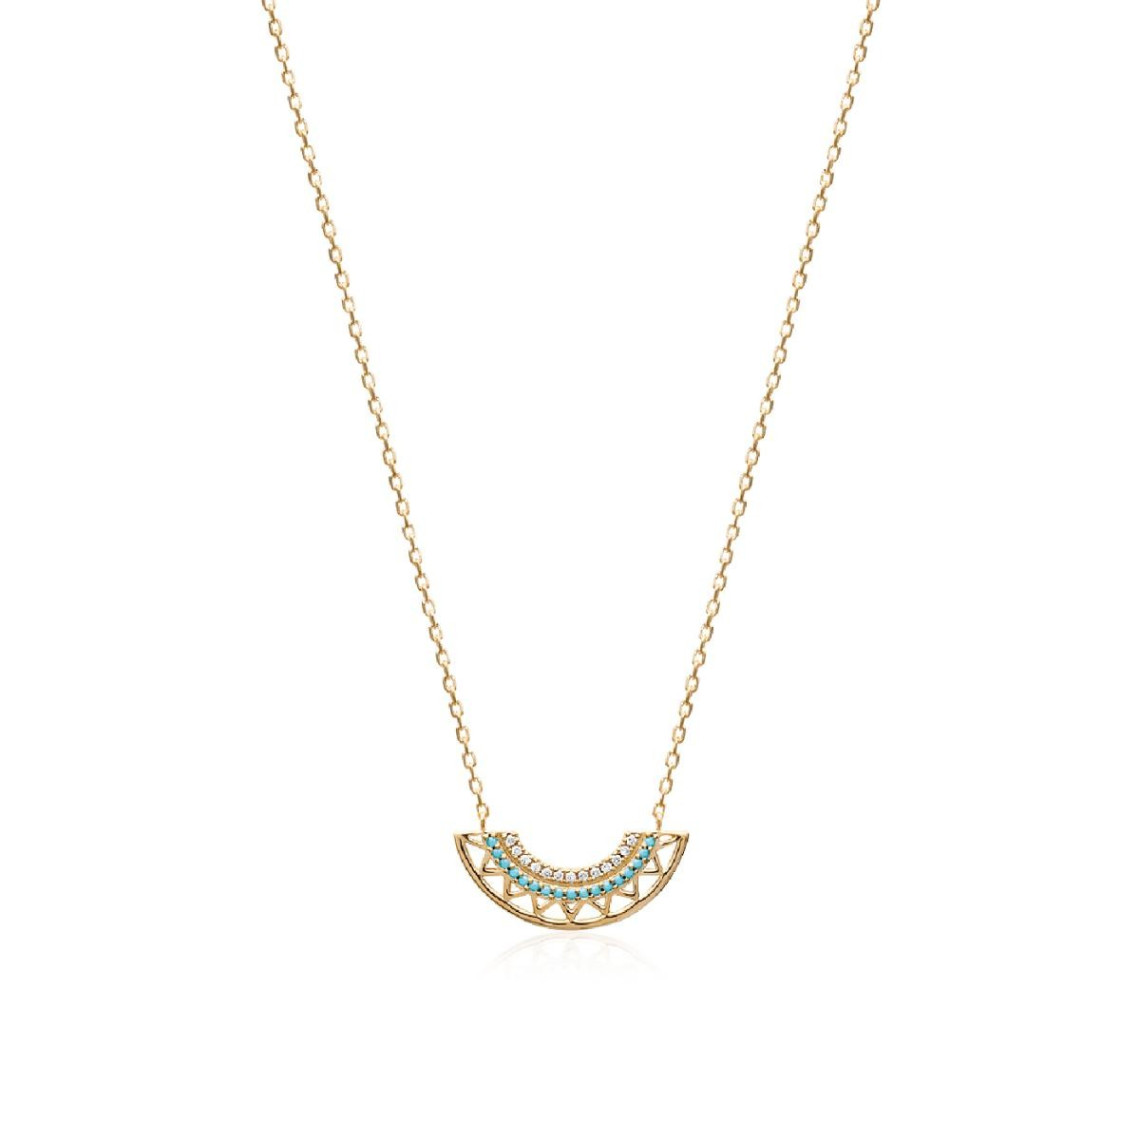 collier femme plaqué or turquoise serti griffe - uwzwuv45